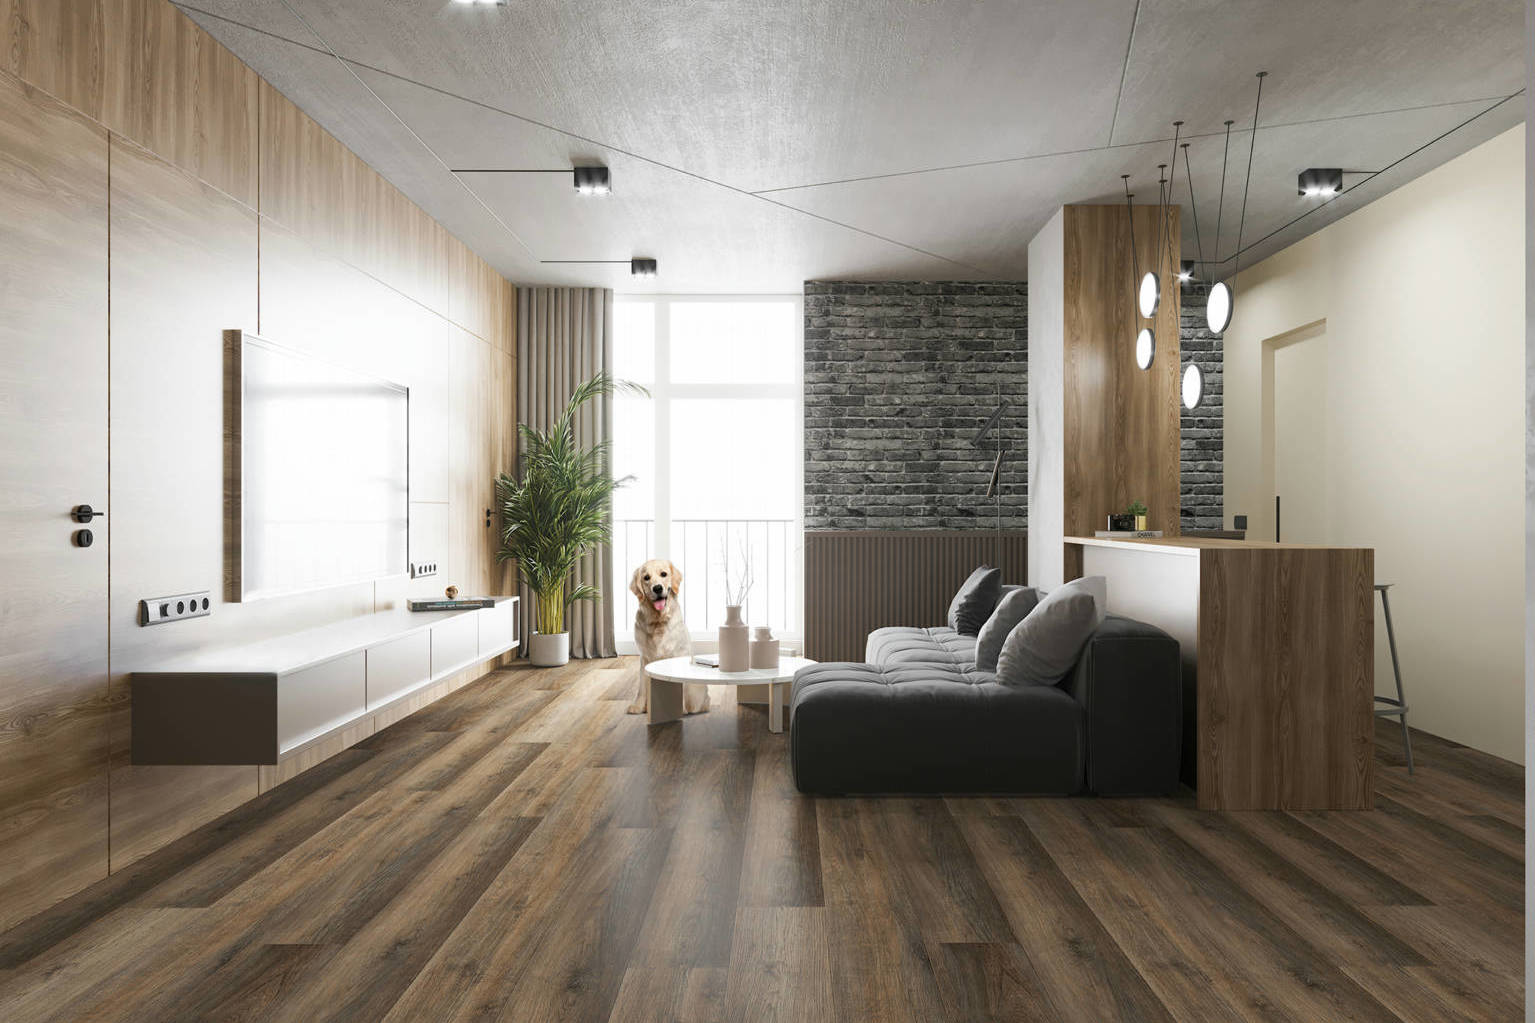 Timber Ridge Gold 12 5 | Qualis Ceramica | Luxury Tile and Vinyl at affordable prices